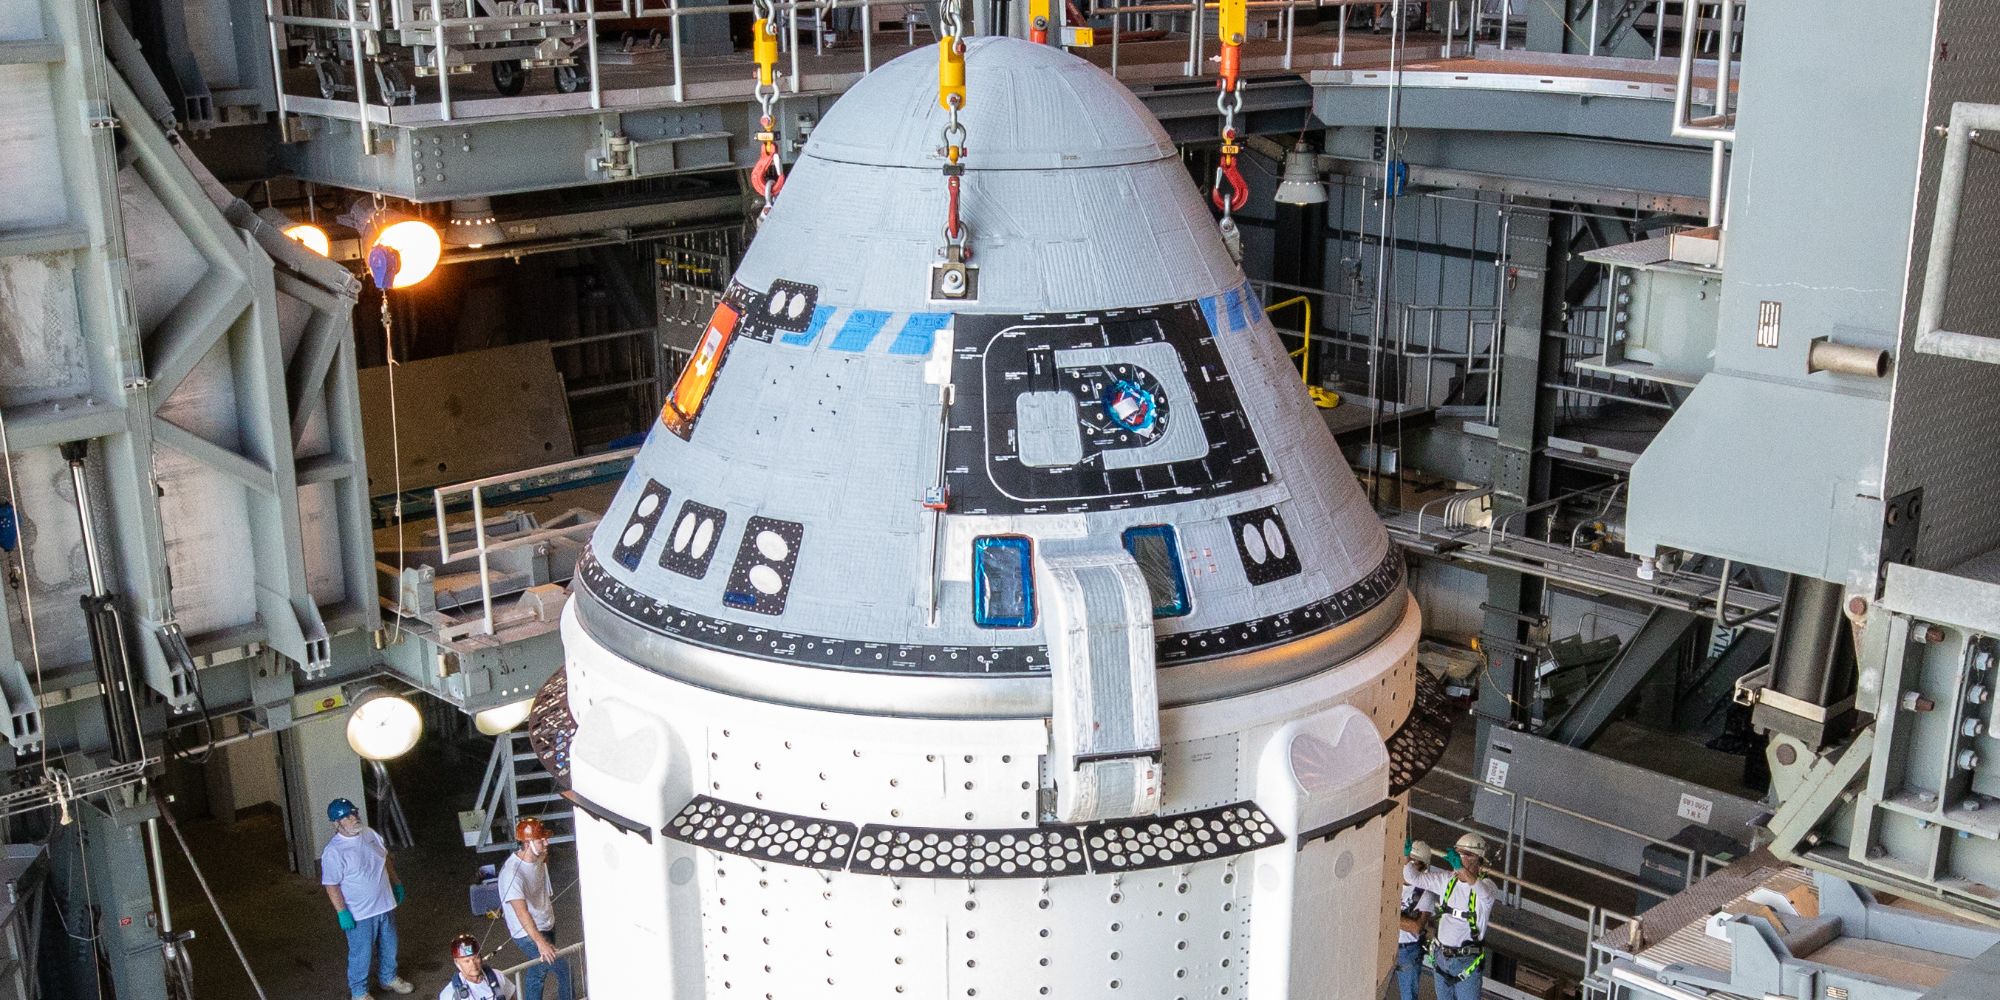 Boeing Starliner capsule at the Vertical Integration Facility